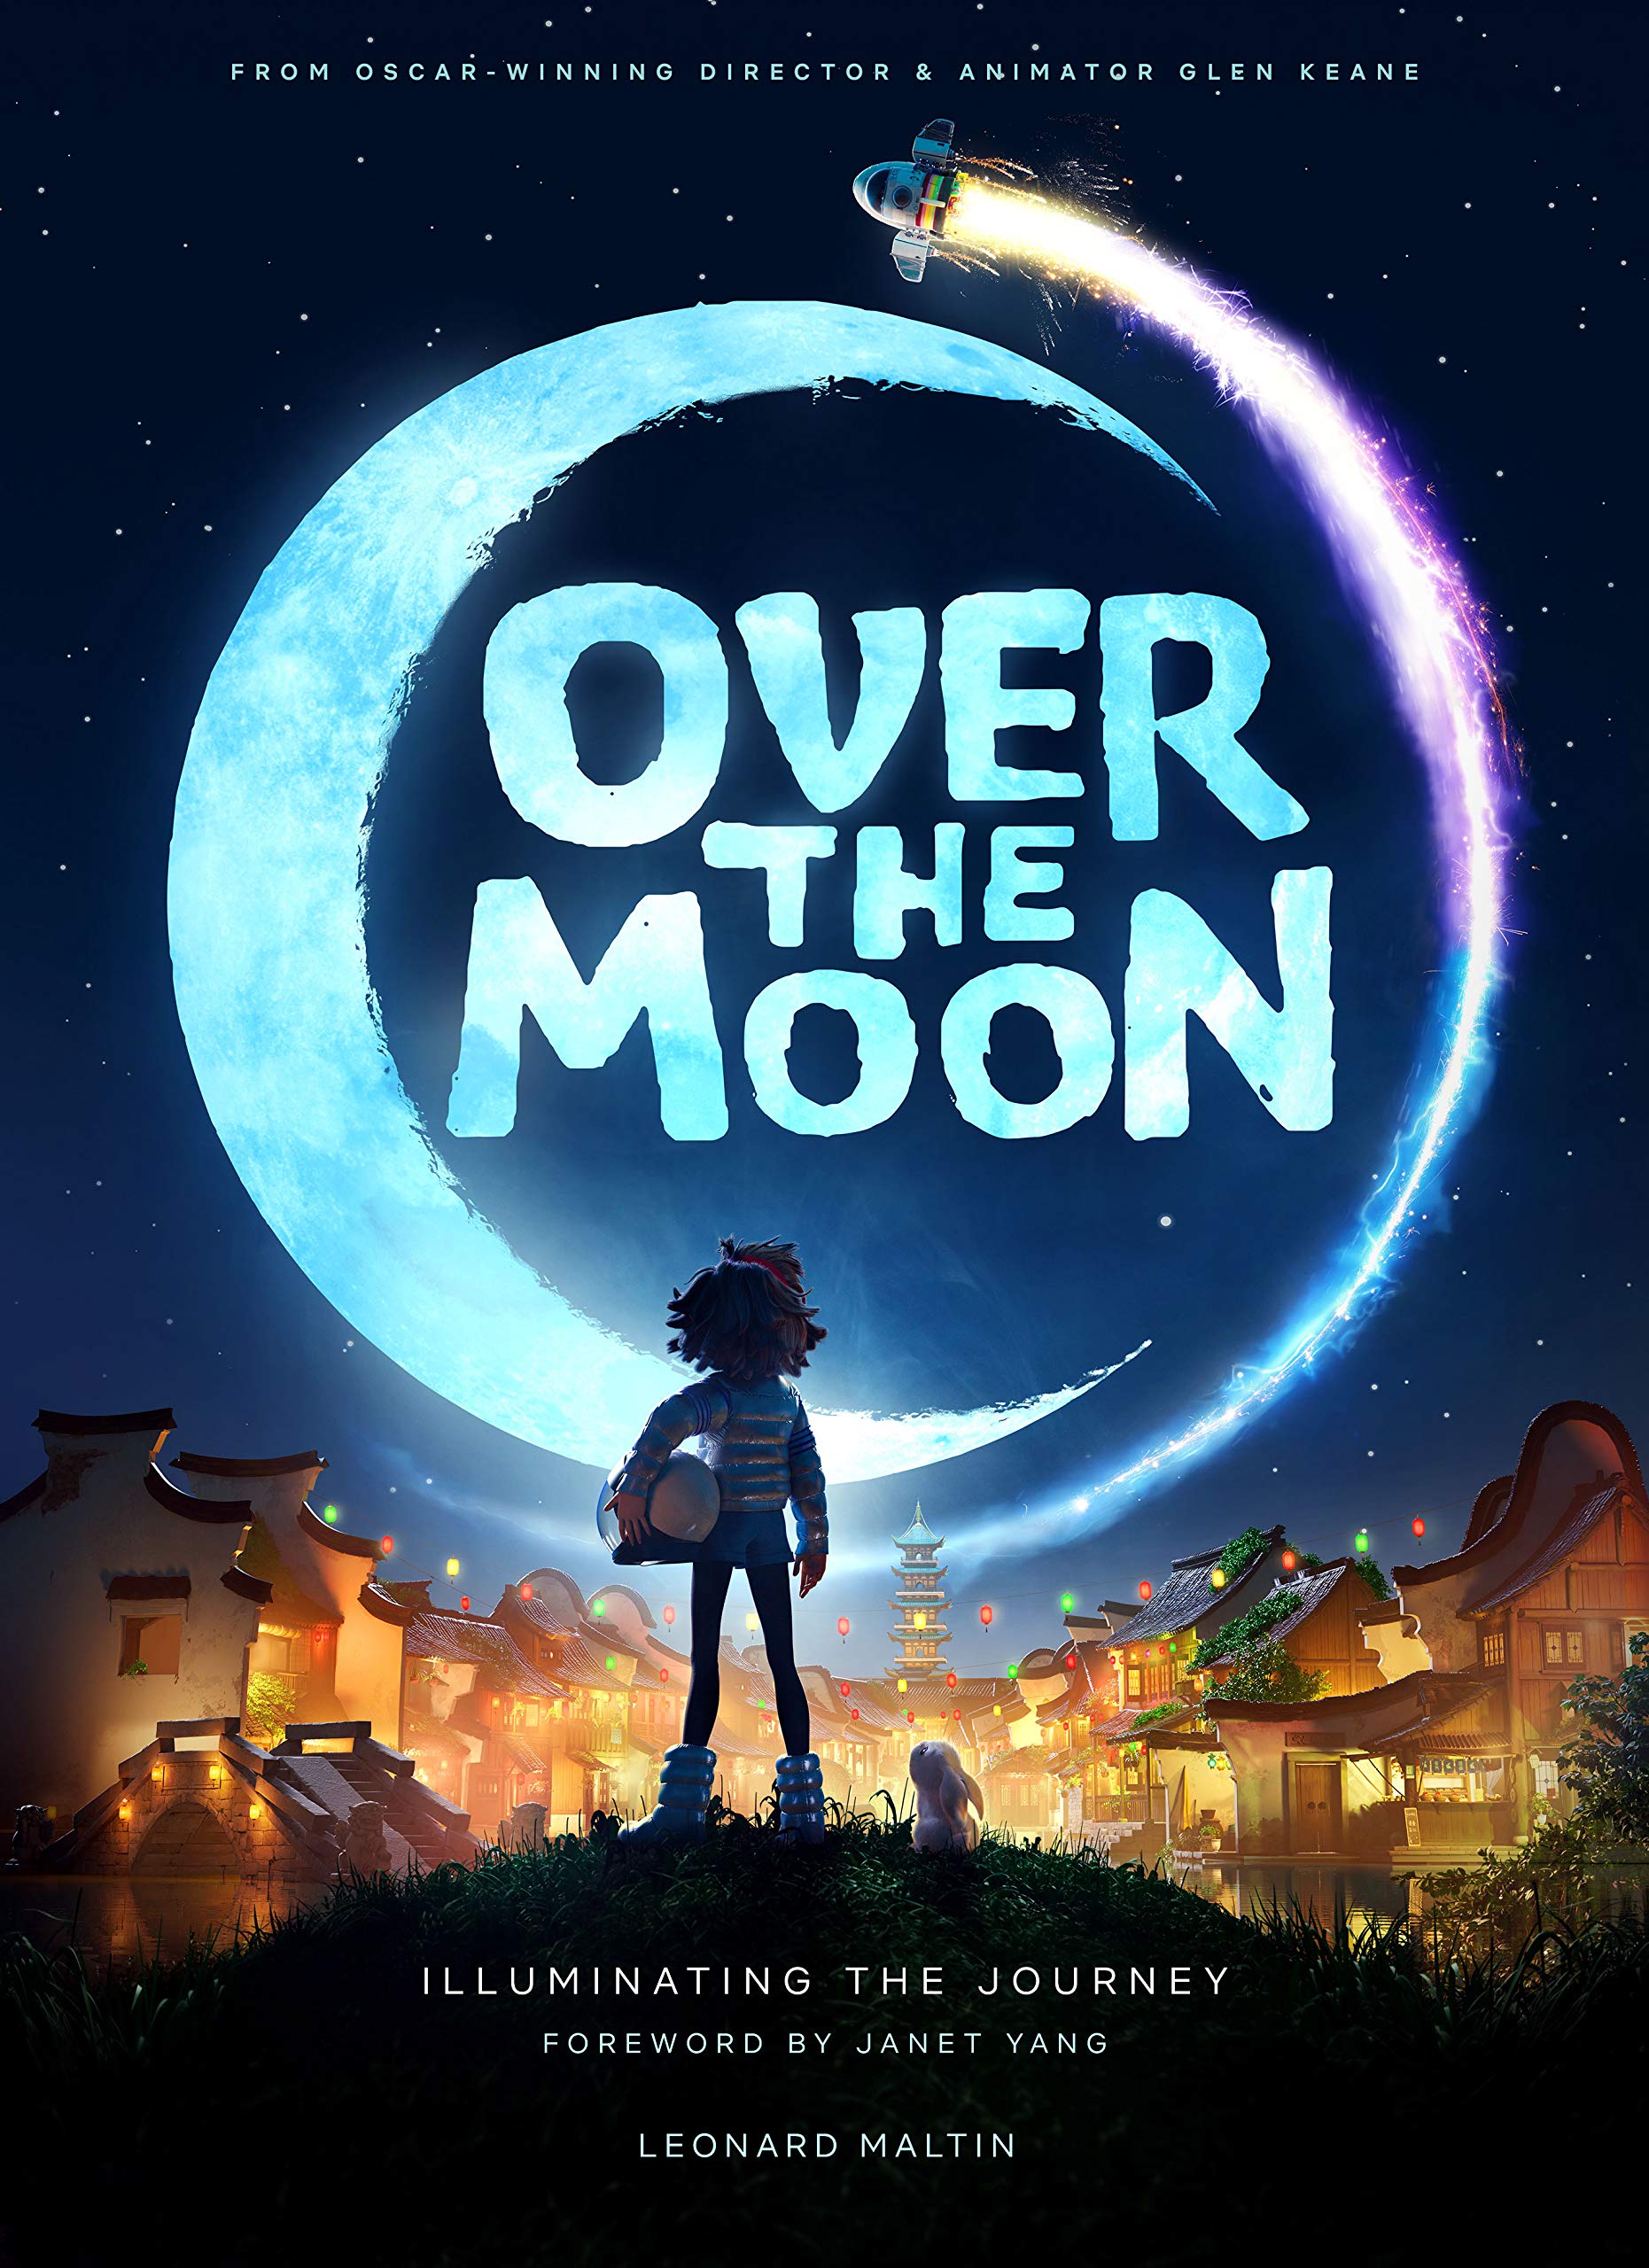 Over the Moon: Illuminating the Journey Art Book Preview